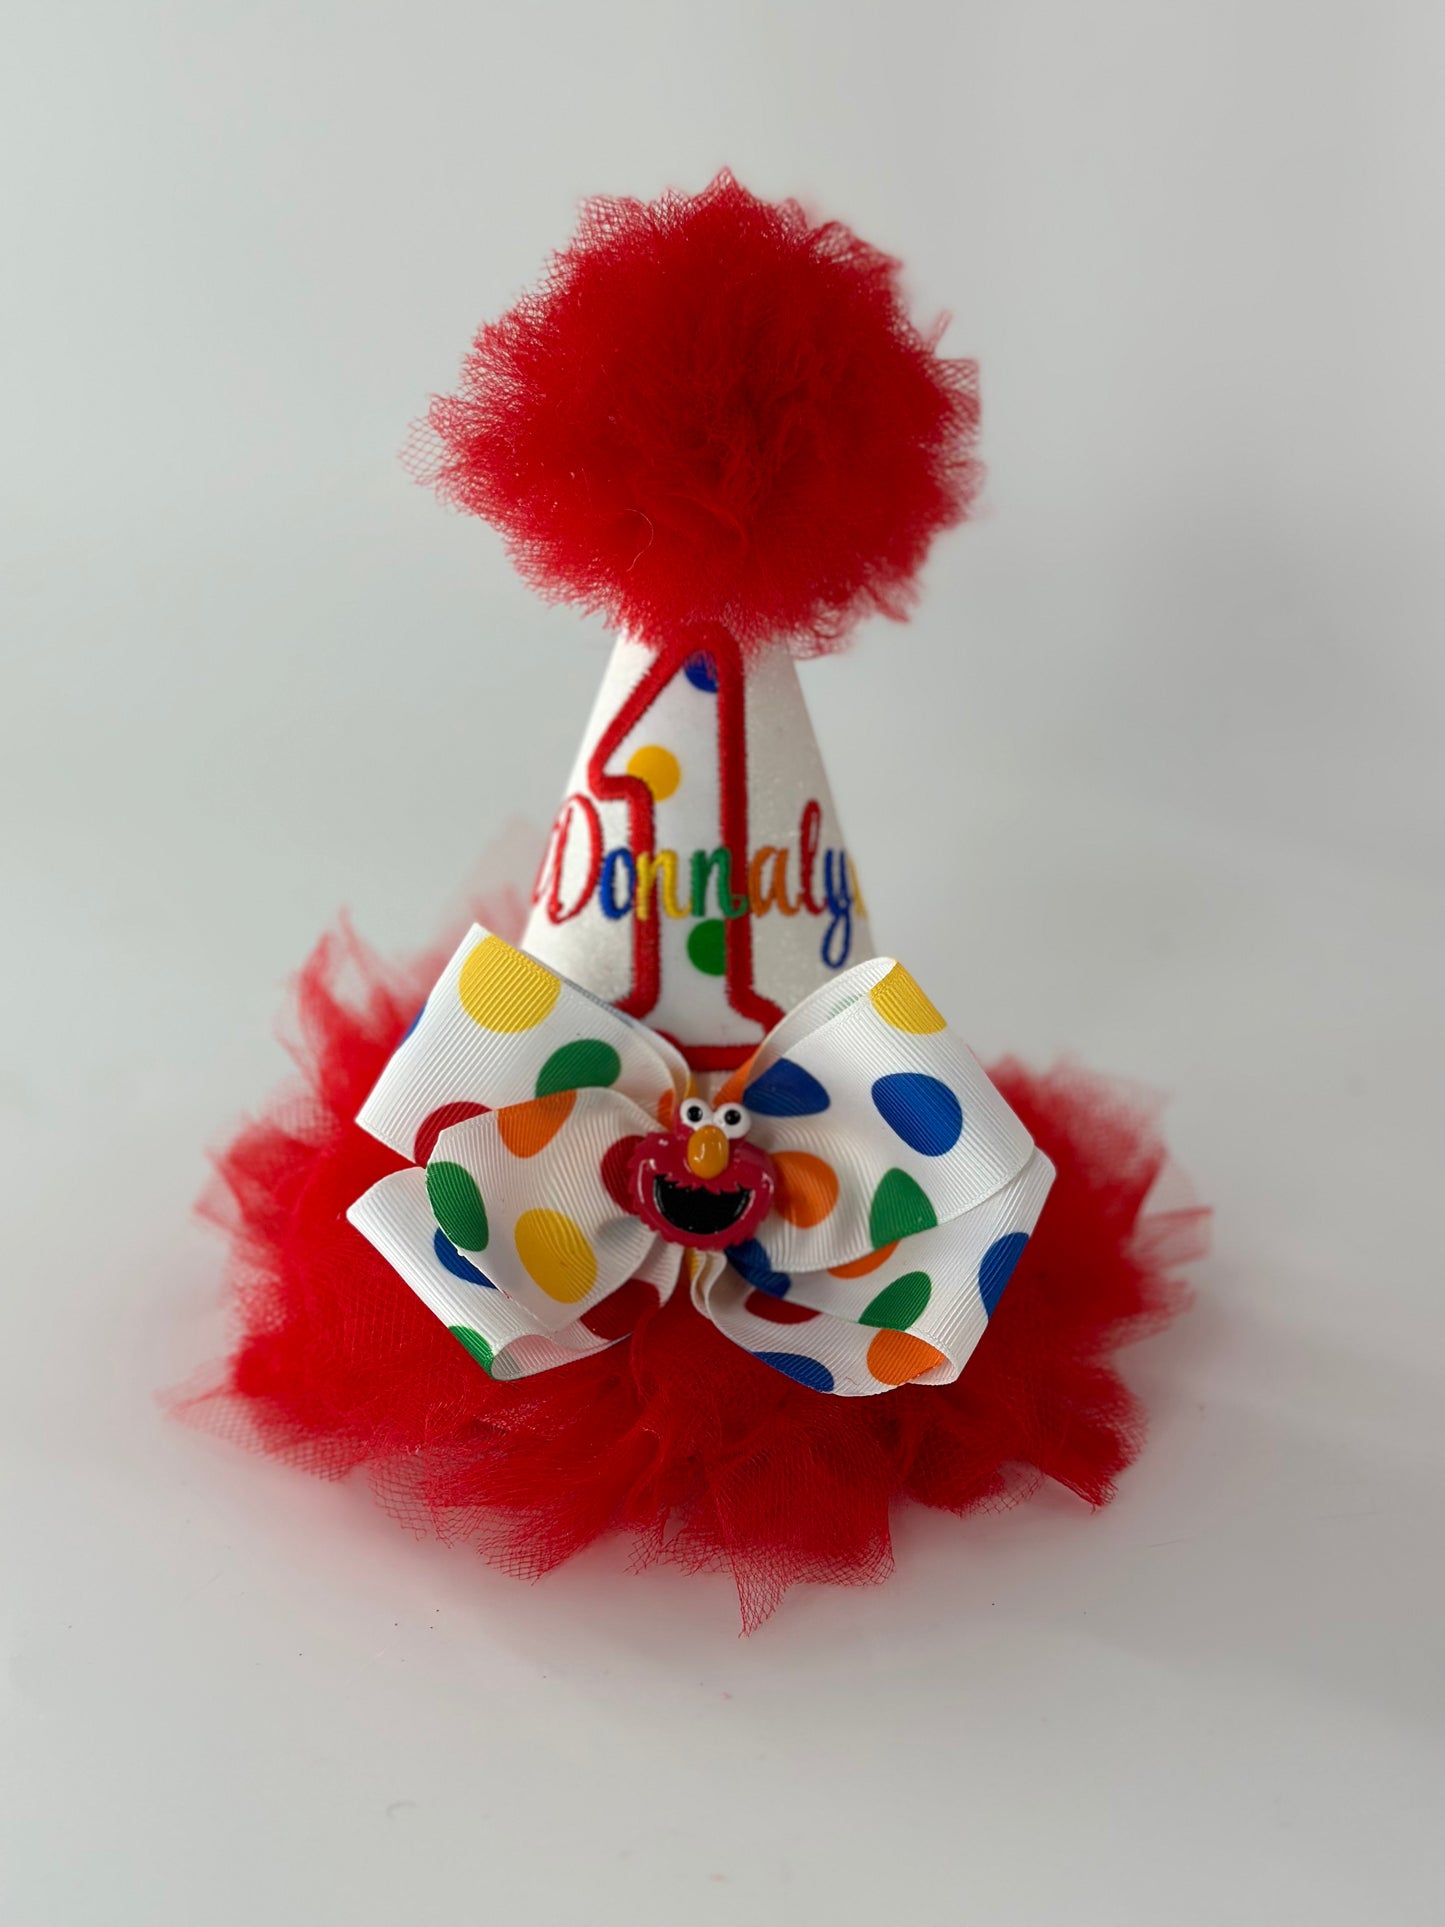 Red Tutu Furry Puppet Street Character Birthday Outfit, Rainbow Polka Dot Birthday Ribbon Trimmed Tutu Outfit